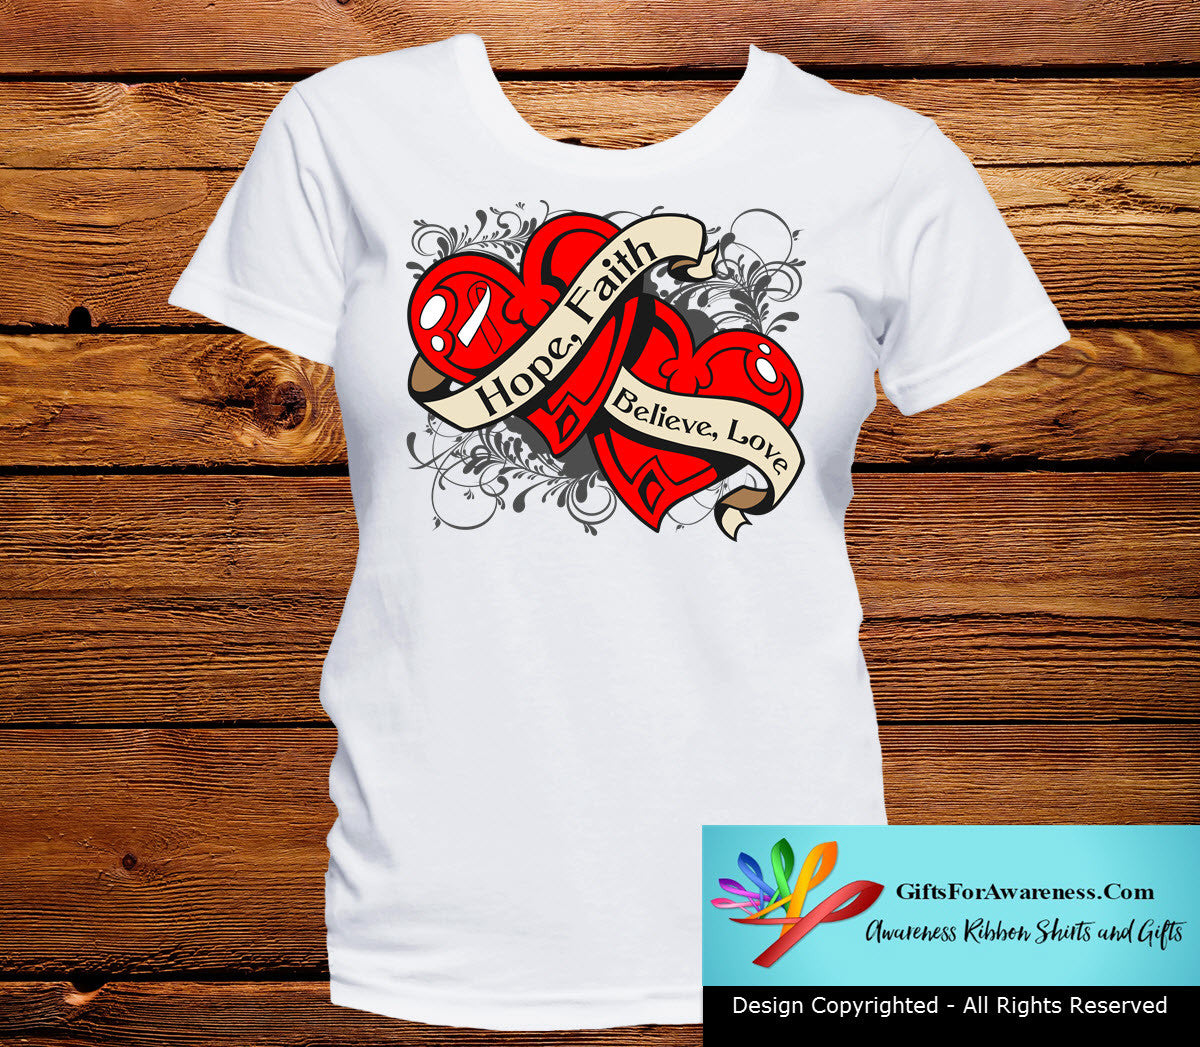 Squamous Cell Carcinoma Hope Believe Faith Love Shirts - GiftsForAwareness